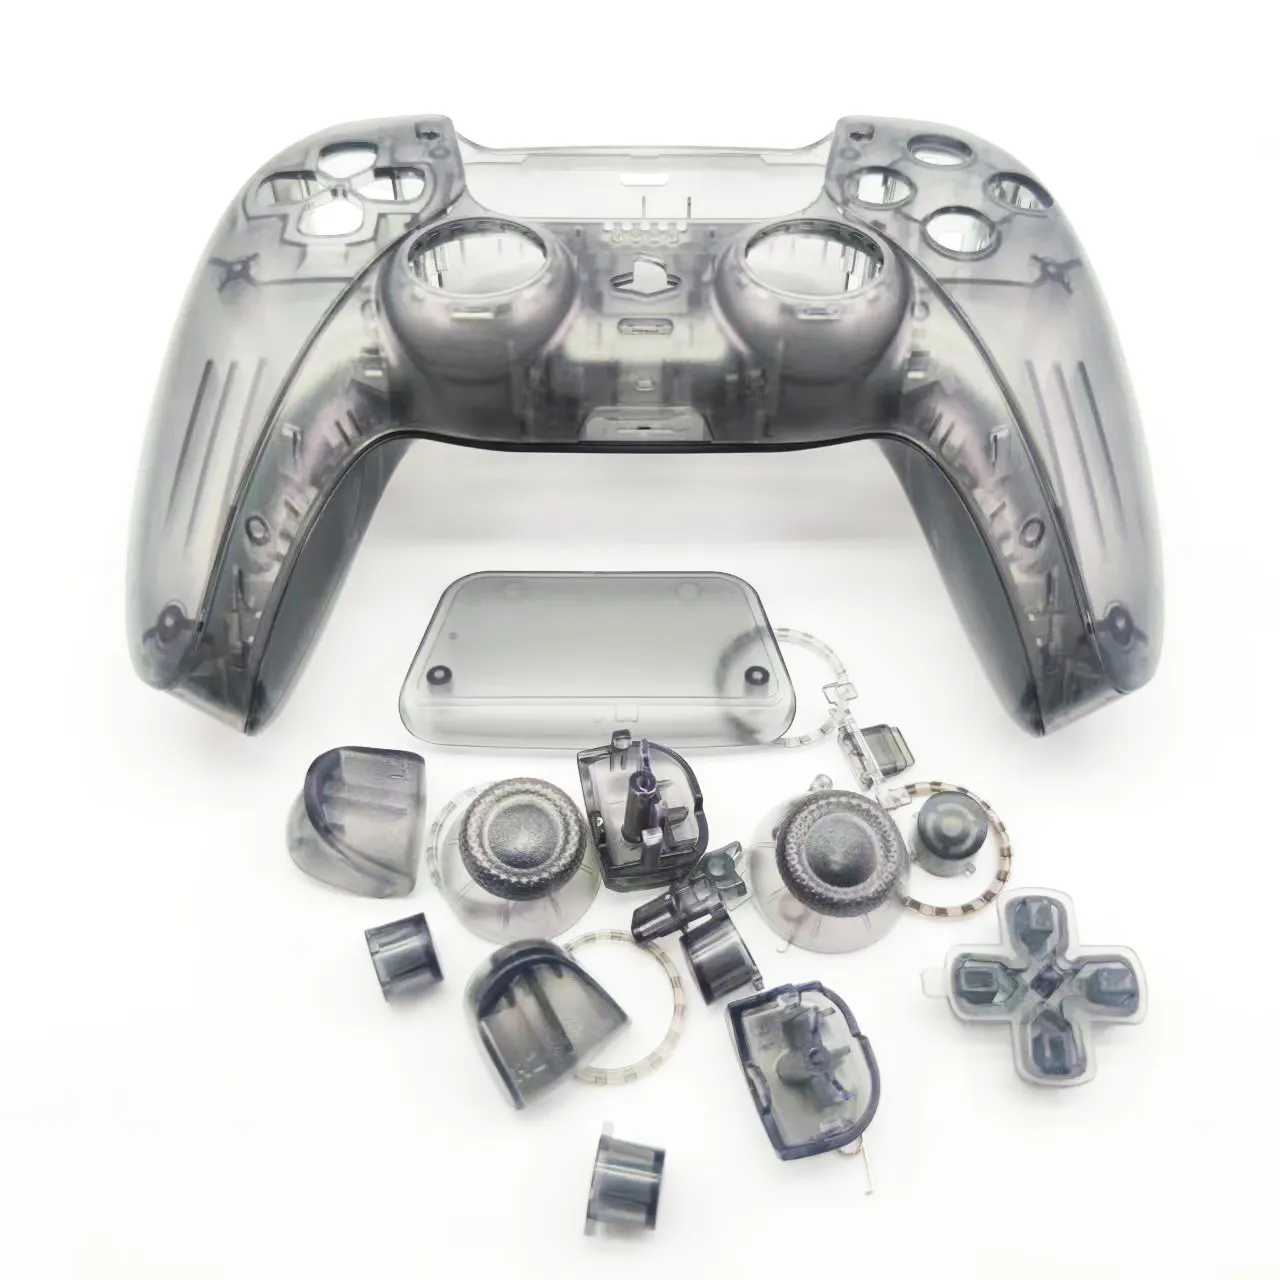 Full Set Front Back Shell Case for PS5 Controller Housing Shell Case Cover Decorative Trim strip Button BDM-010